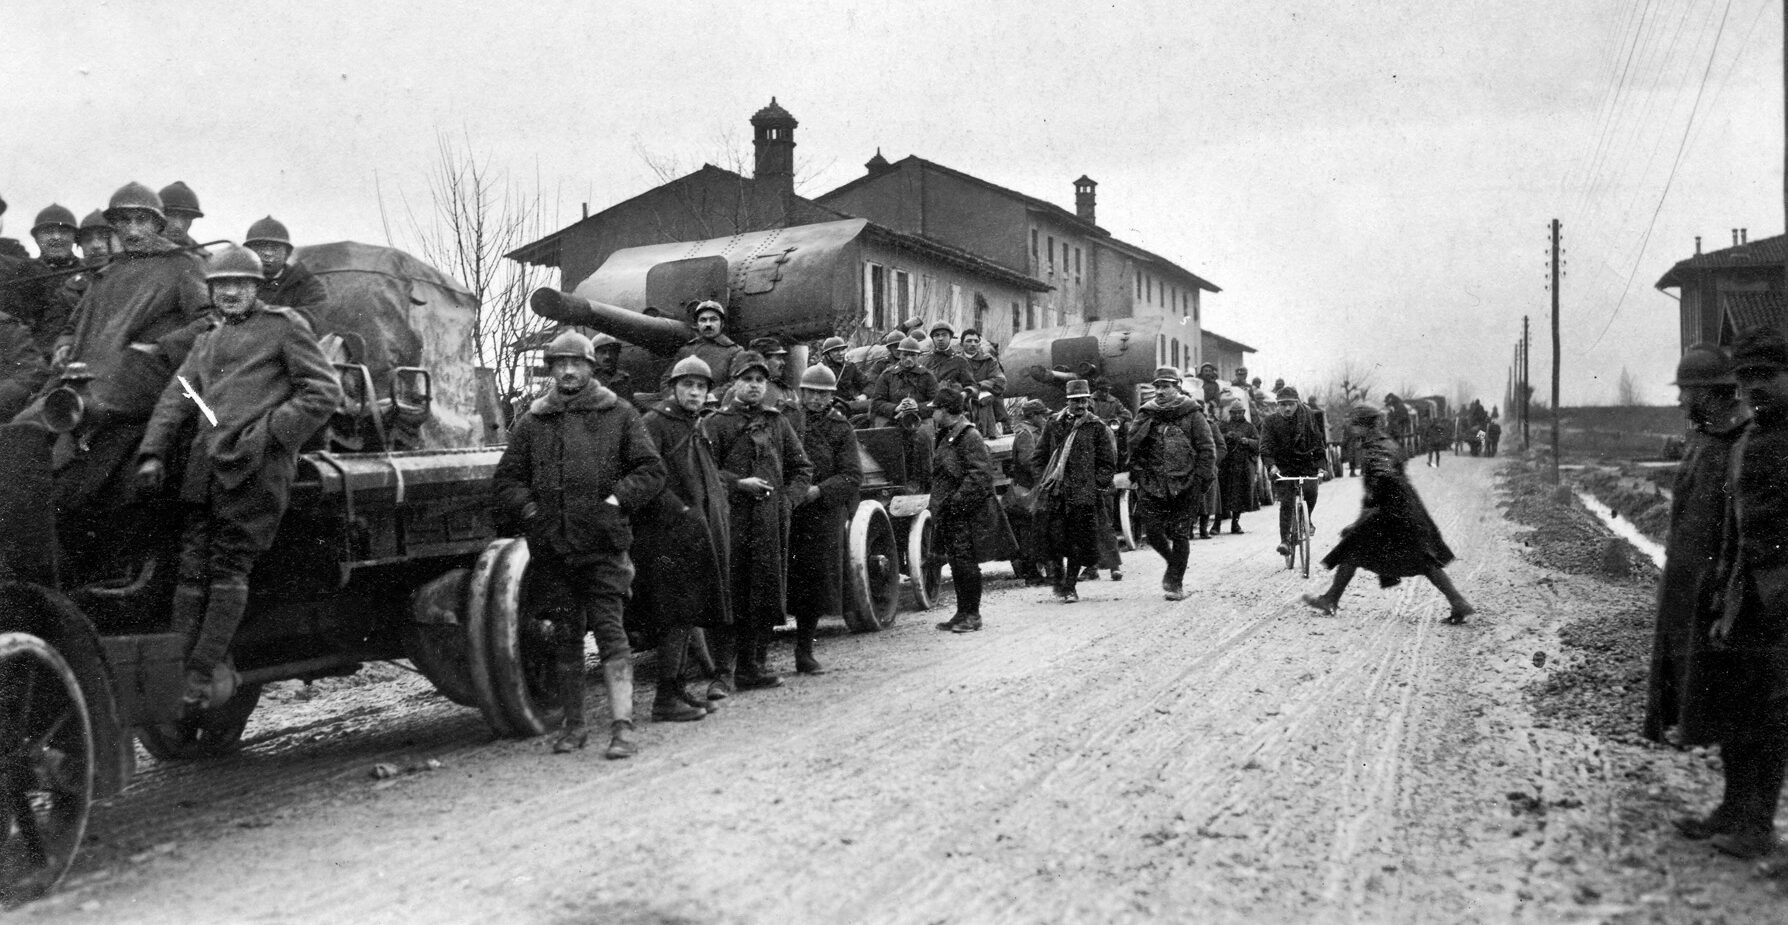 A column of Italian anti-aircraft gun trucks heads to the rear during the long Italian retreat at Caporetto. The Italian army was on the brink of collapse when British and French troops arrived to  stabilize the situation.